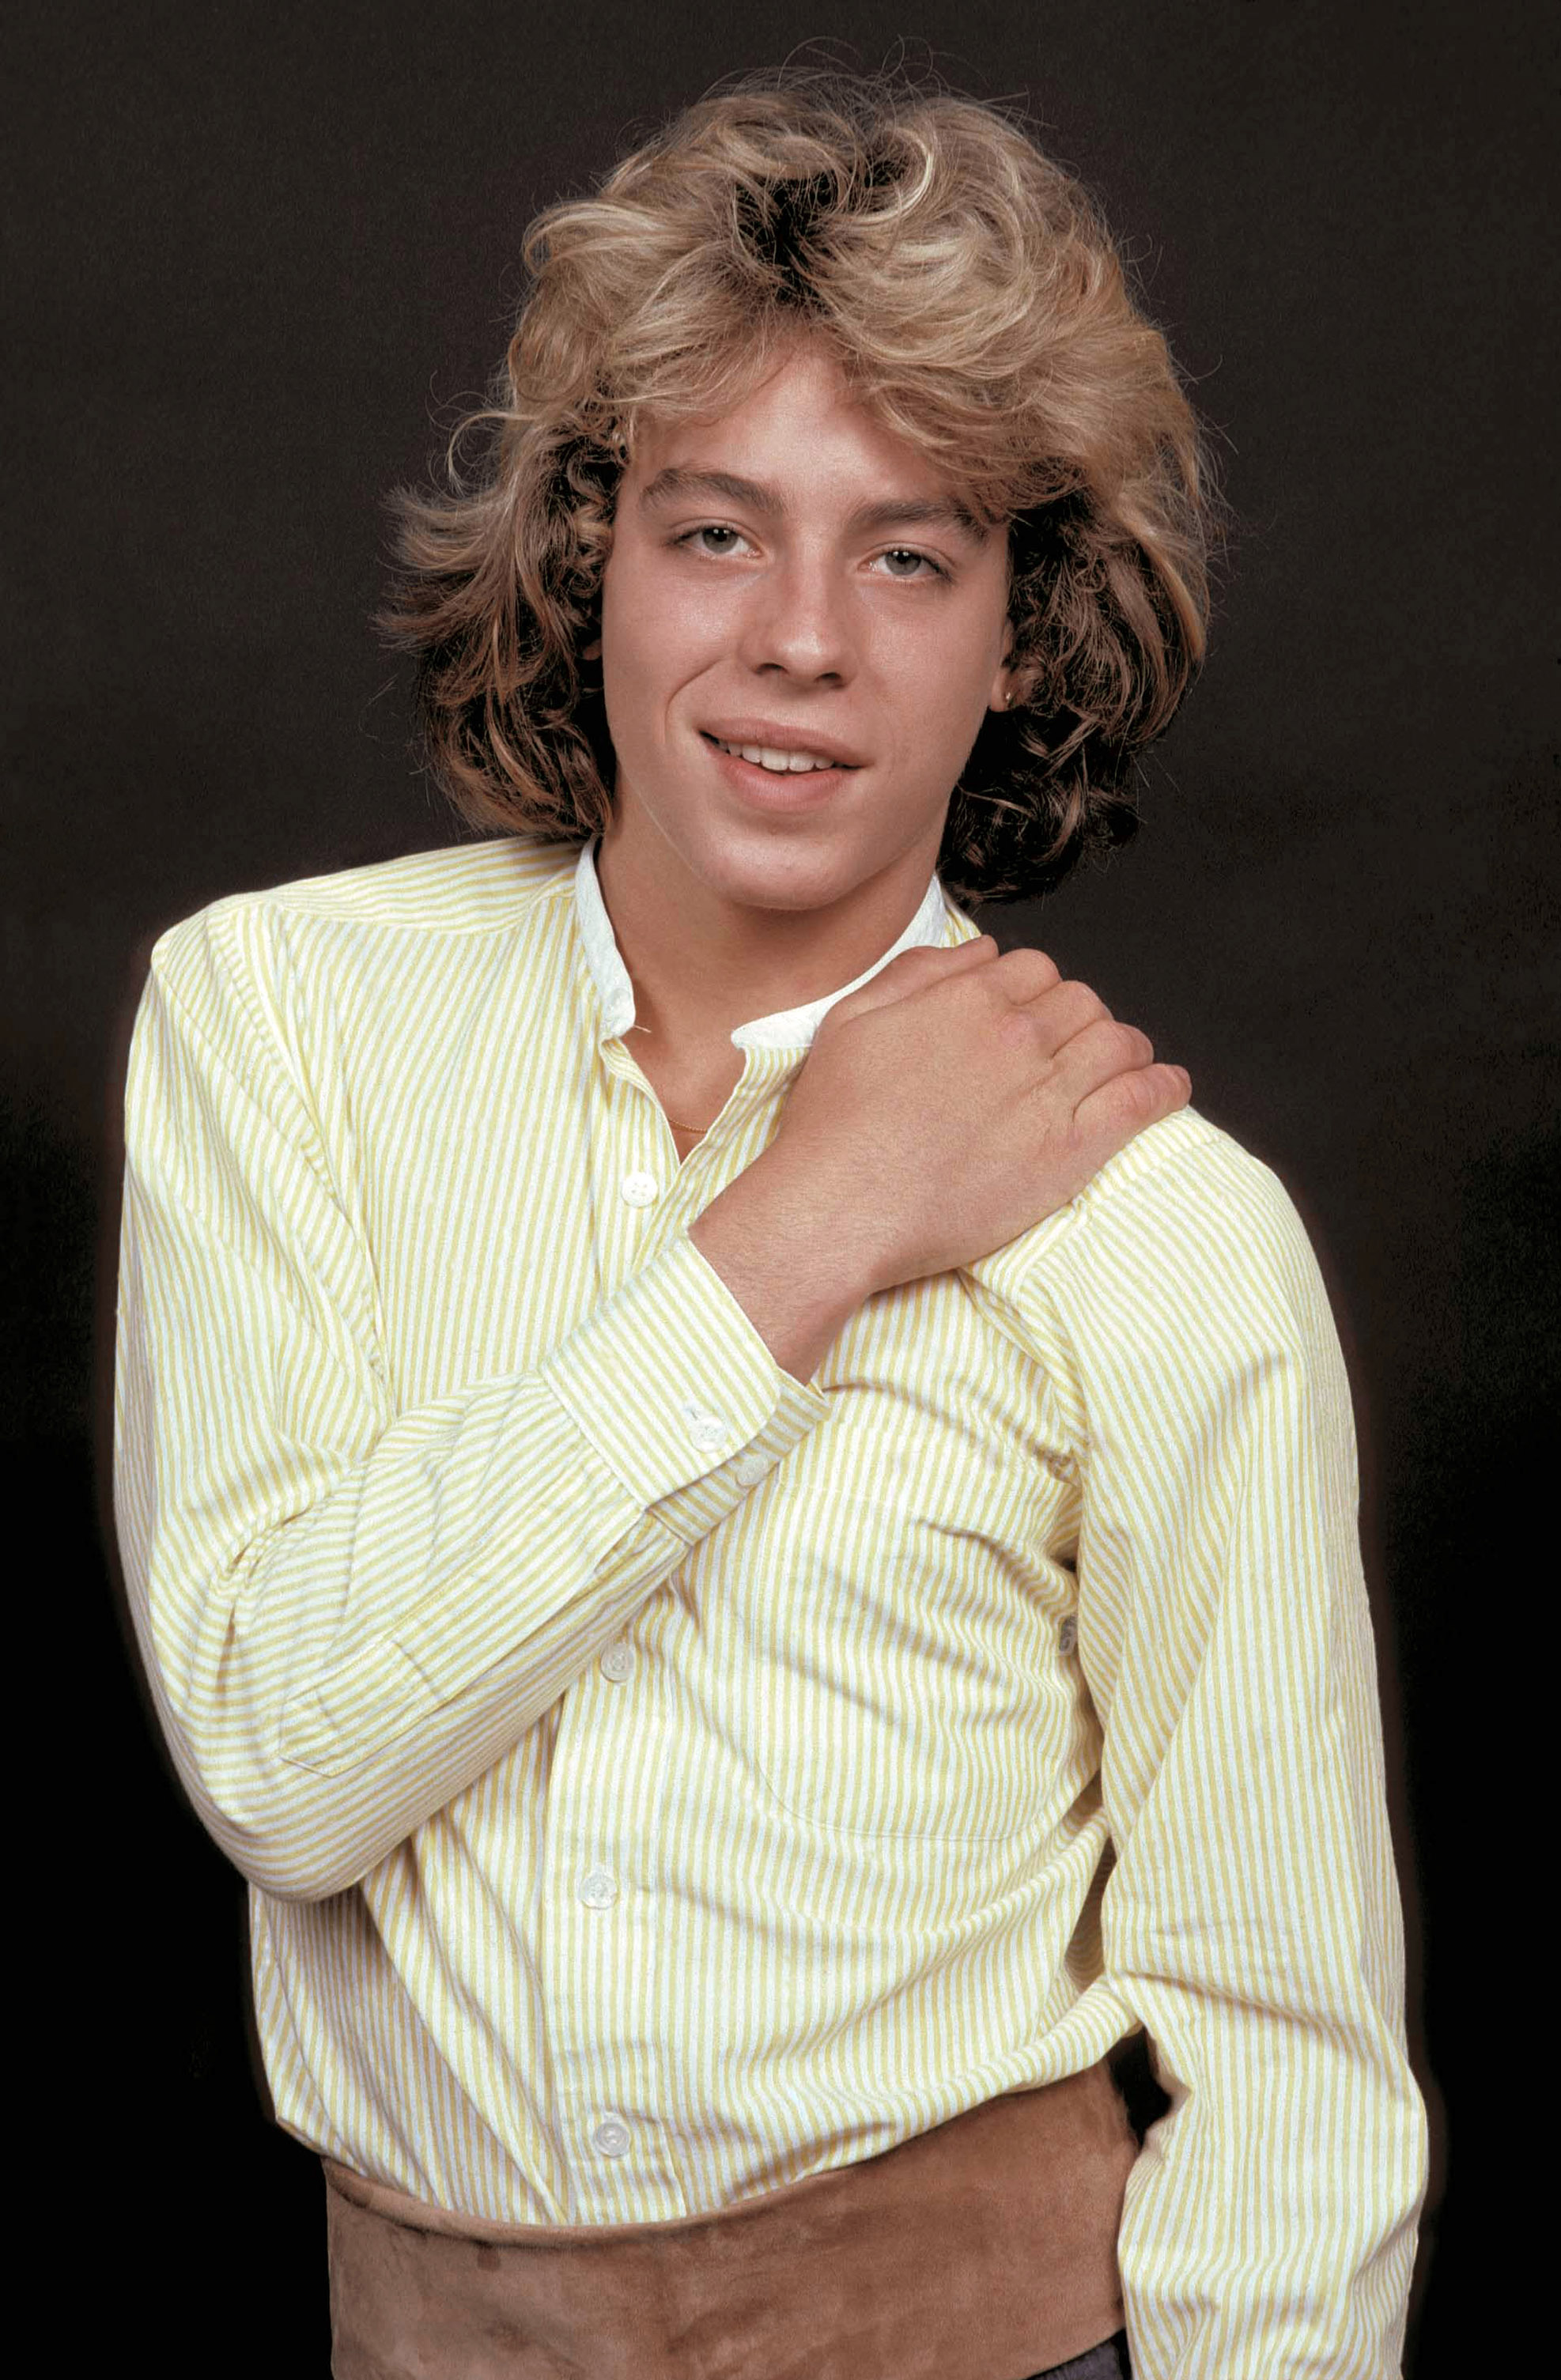 Leif Garrett in Los Angeles, California on January 1, 1976. | Source: Getty Images